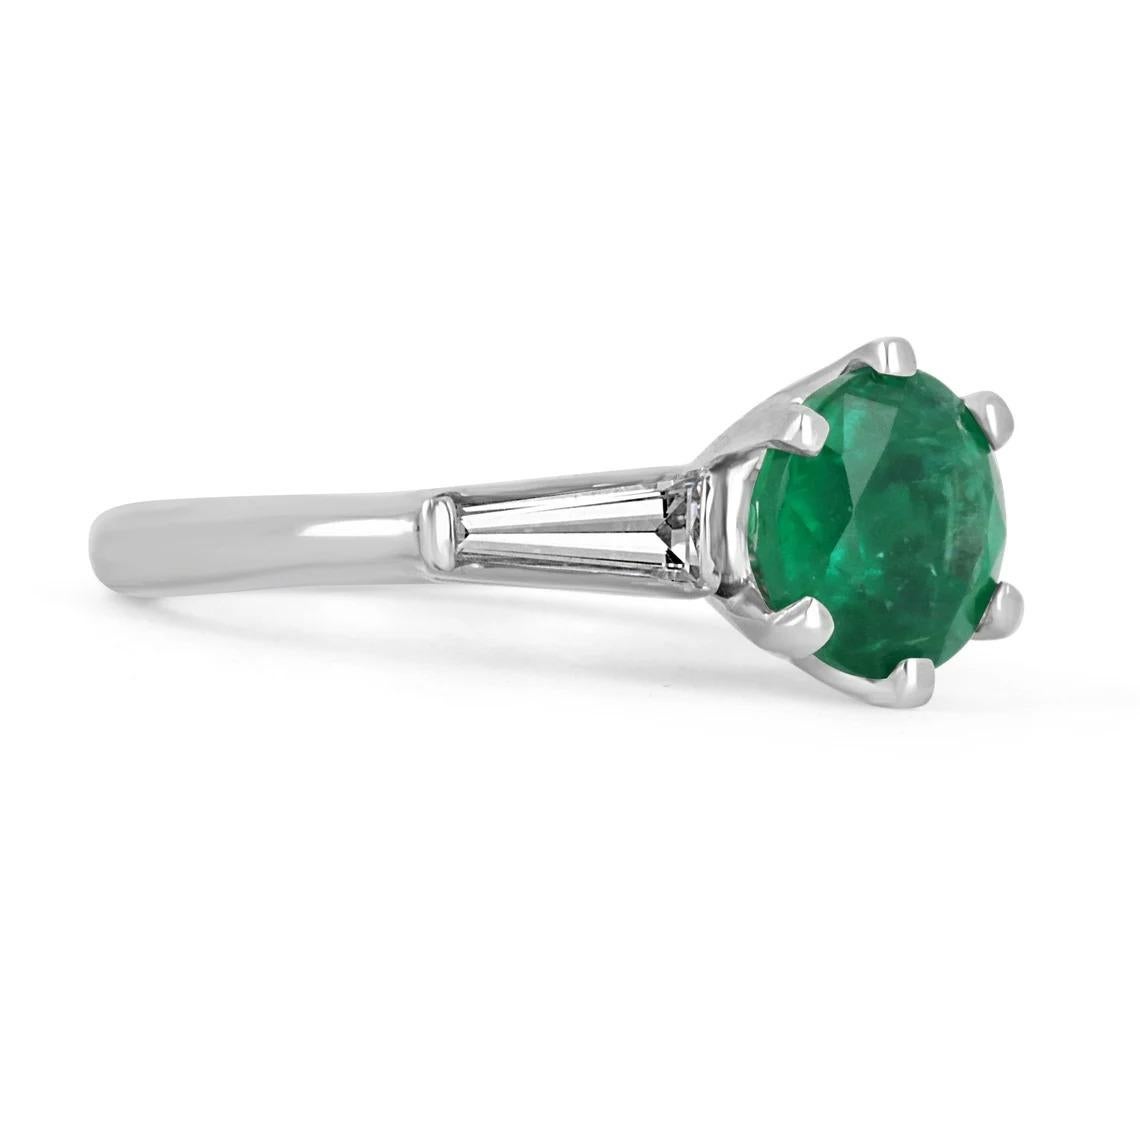 A classic among engagement rings, this genuine emerald, and tapered diamond engagement ring features a vibrant round Zambian emerald. The genuine rare gemstone has an incredible deep vivid-green color and very good eye clarity. The gem sits gently